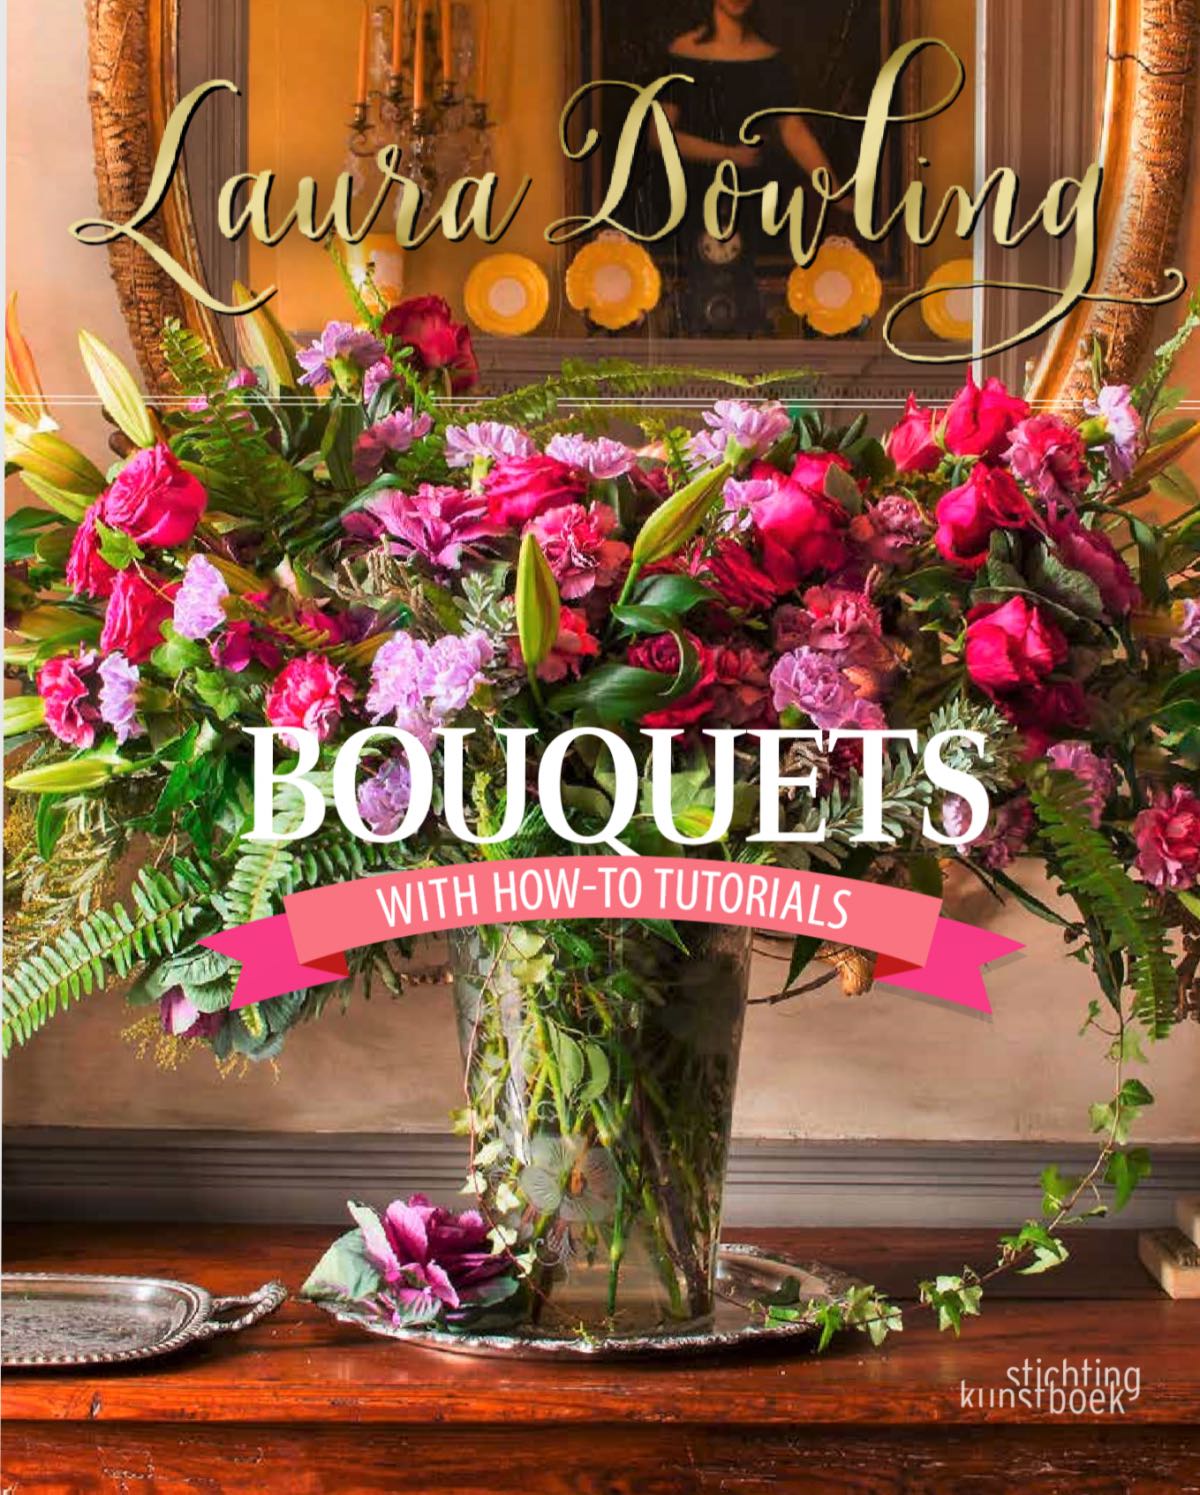 Book cover: Laura Dowling's Bouquets